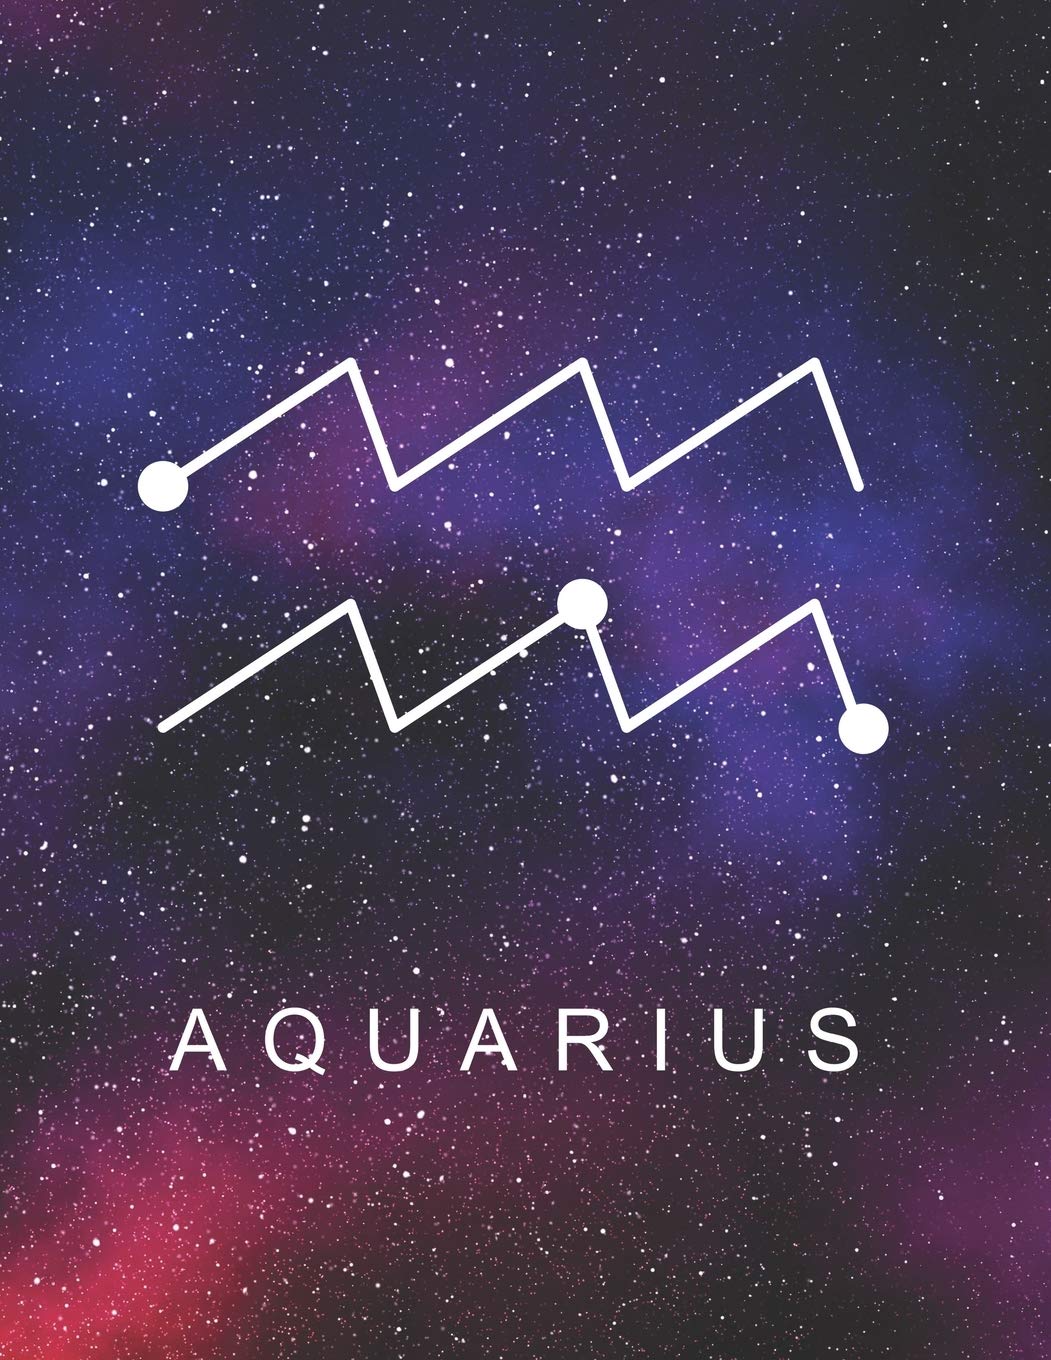 Aquarius is the eleventh sign of the zodiac, and is represented by the water-bearer. - Aquarius